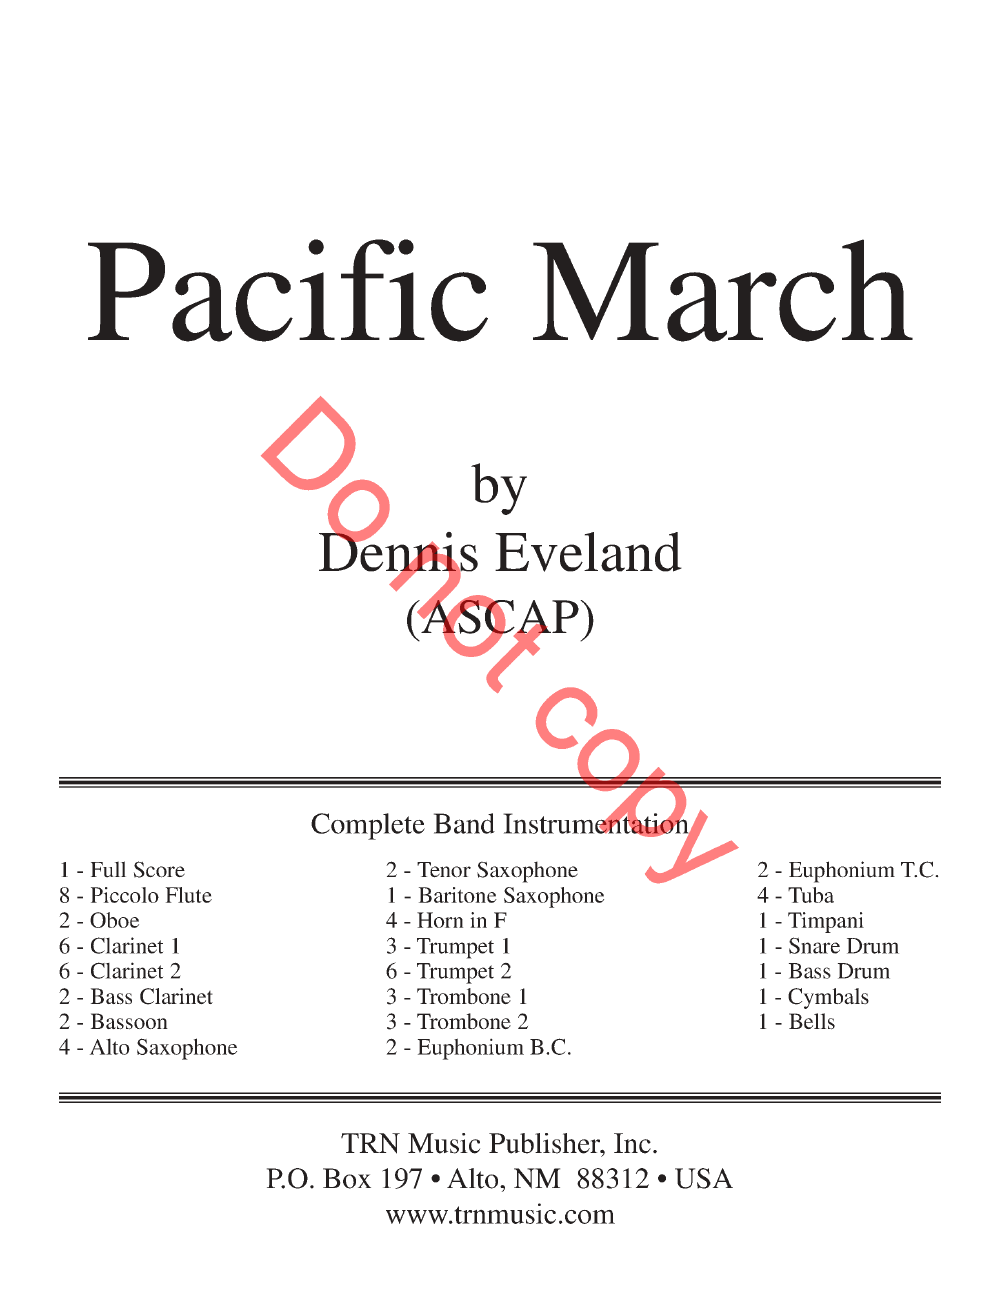 PACIFIC MARCH